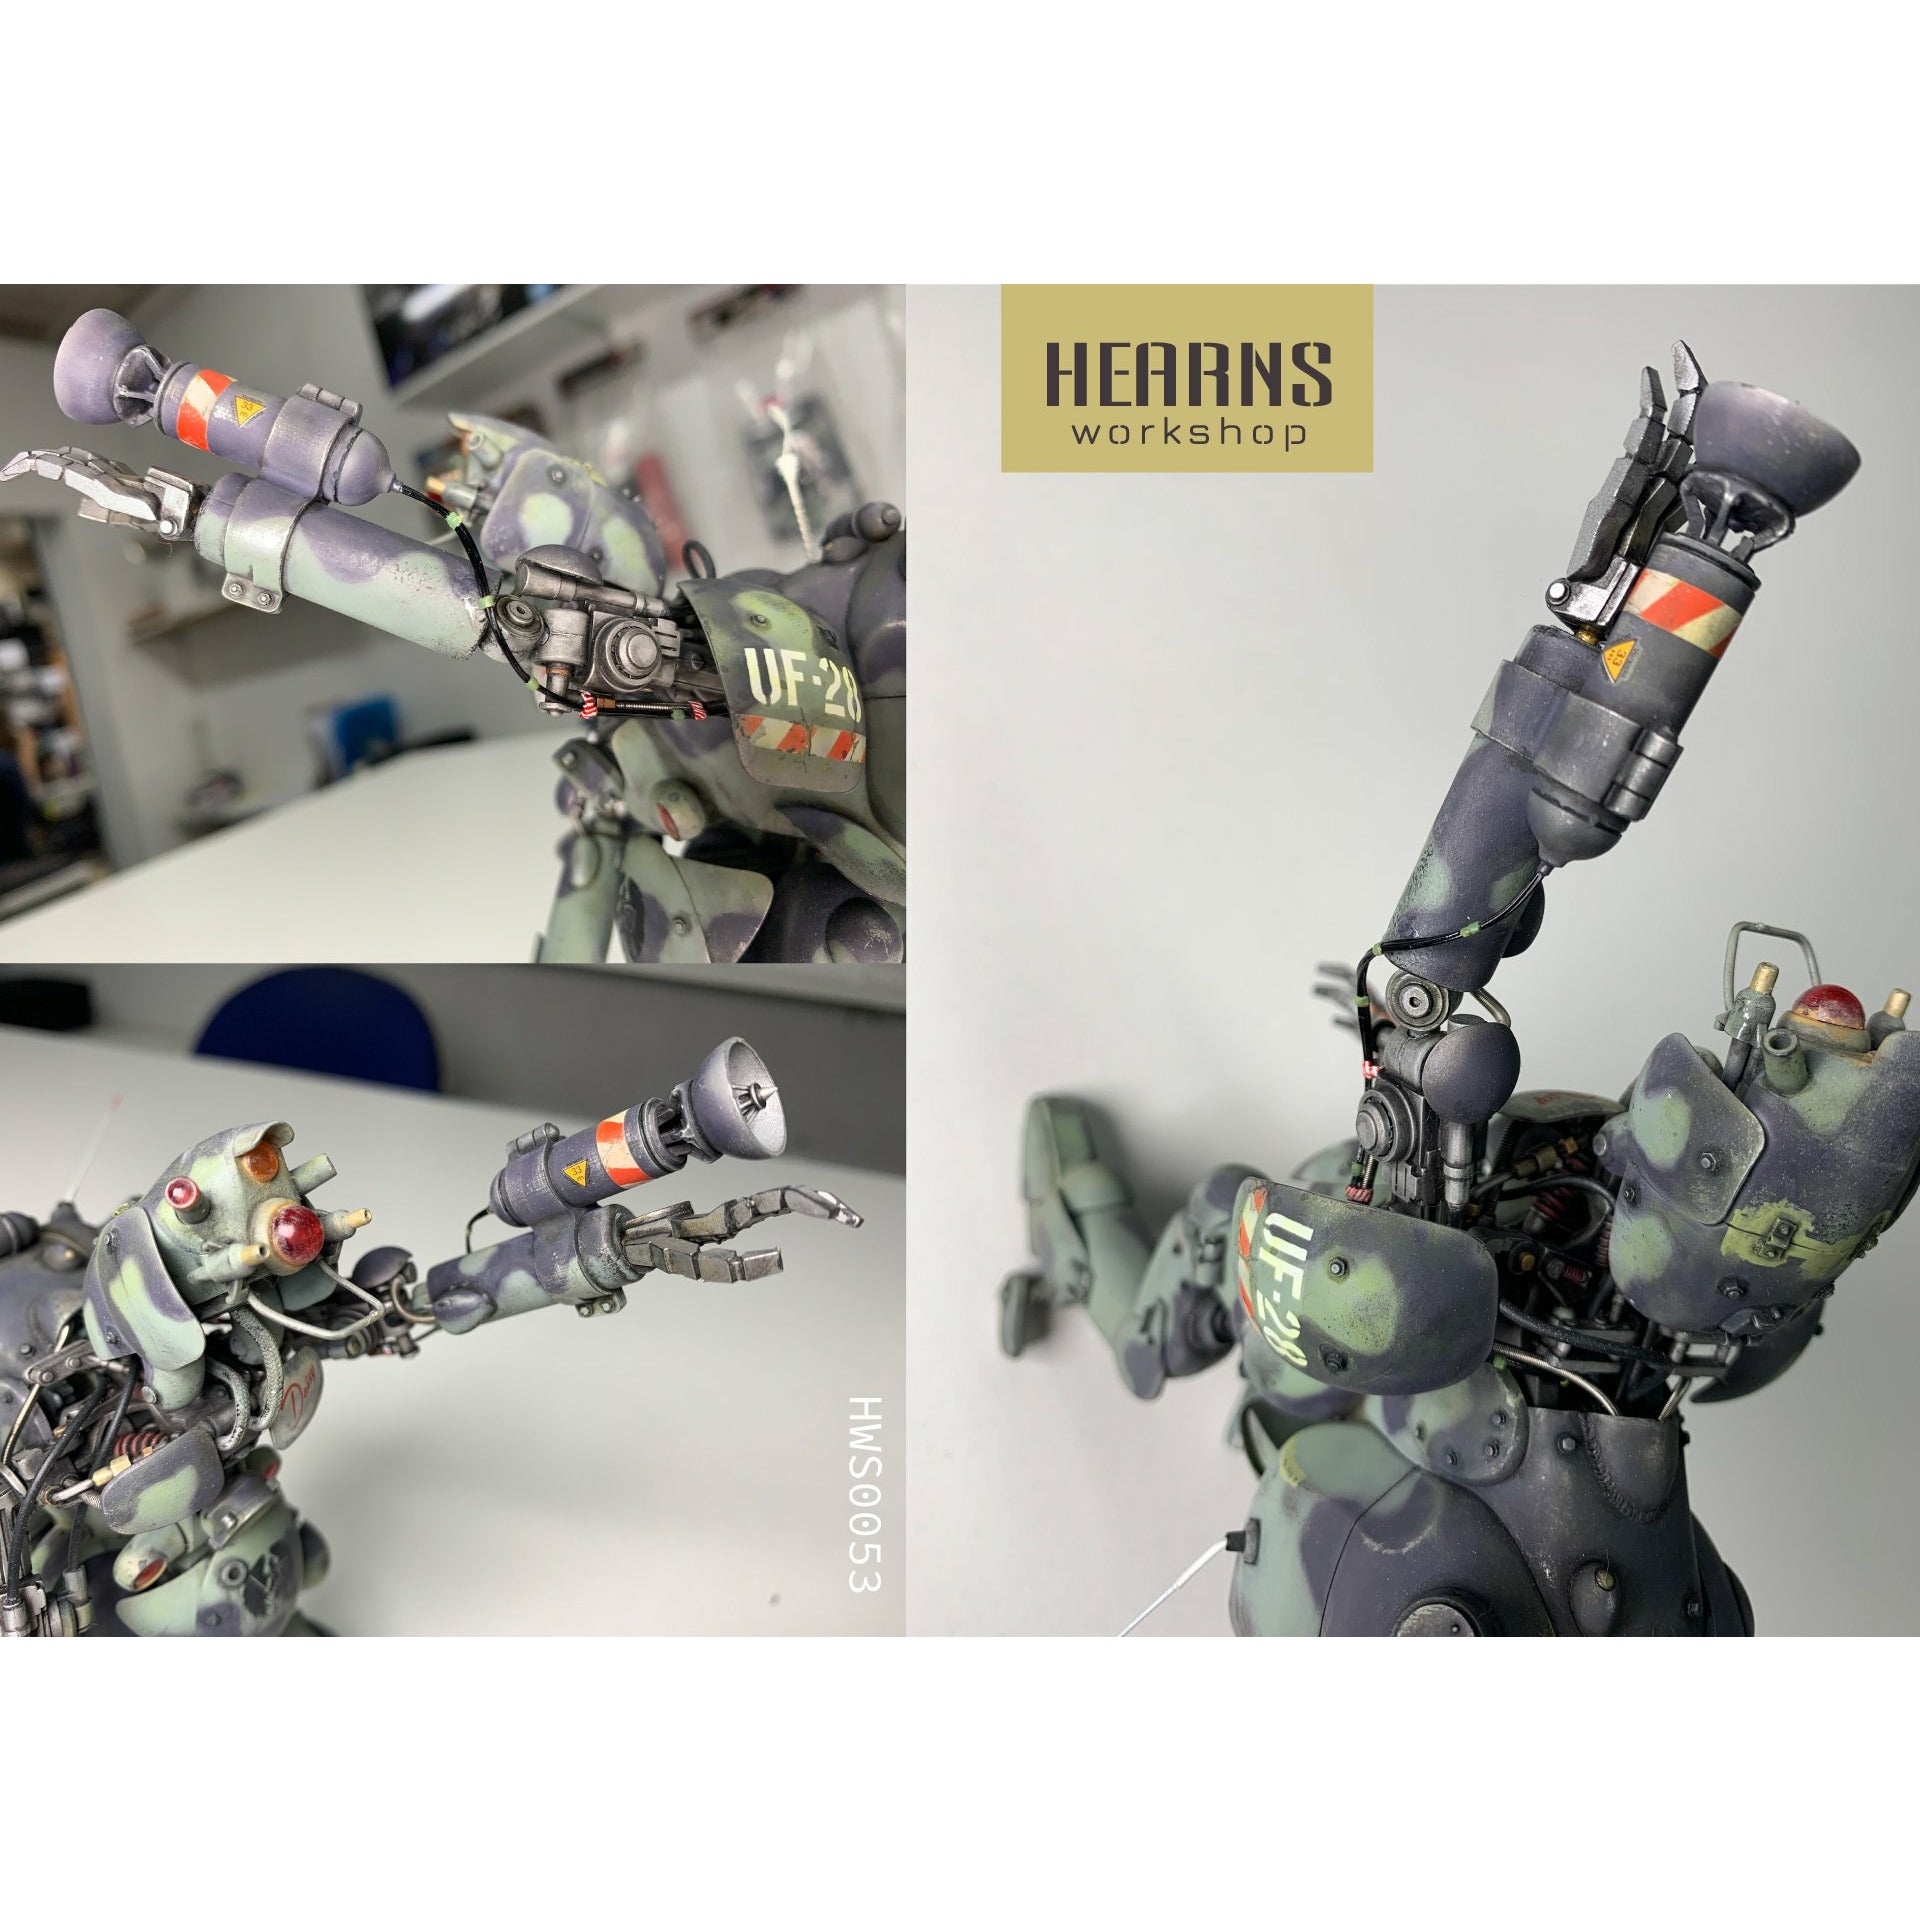 HWS 1/20 Maschinen Krieger Style (Ma.K) Hasegawa Groerhund' Upgrade Parts - 'Super Recon' - Radar Unit with Forearms and Hands